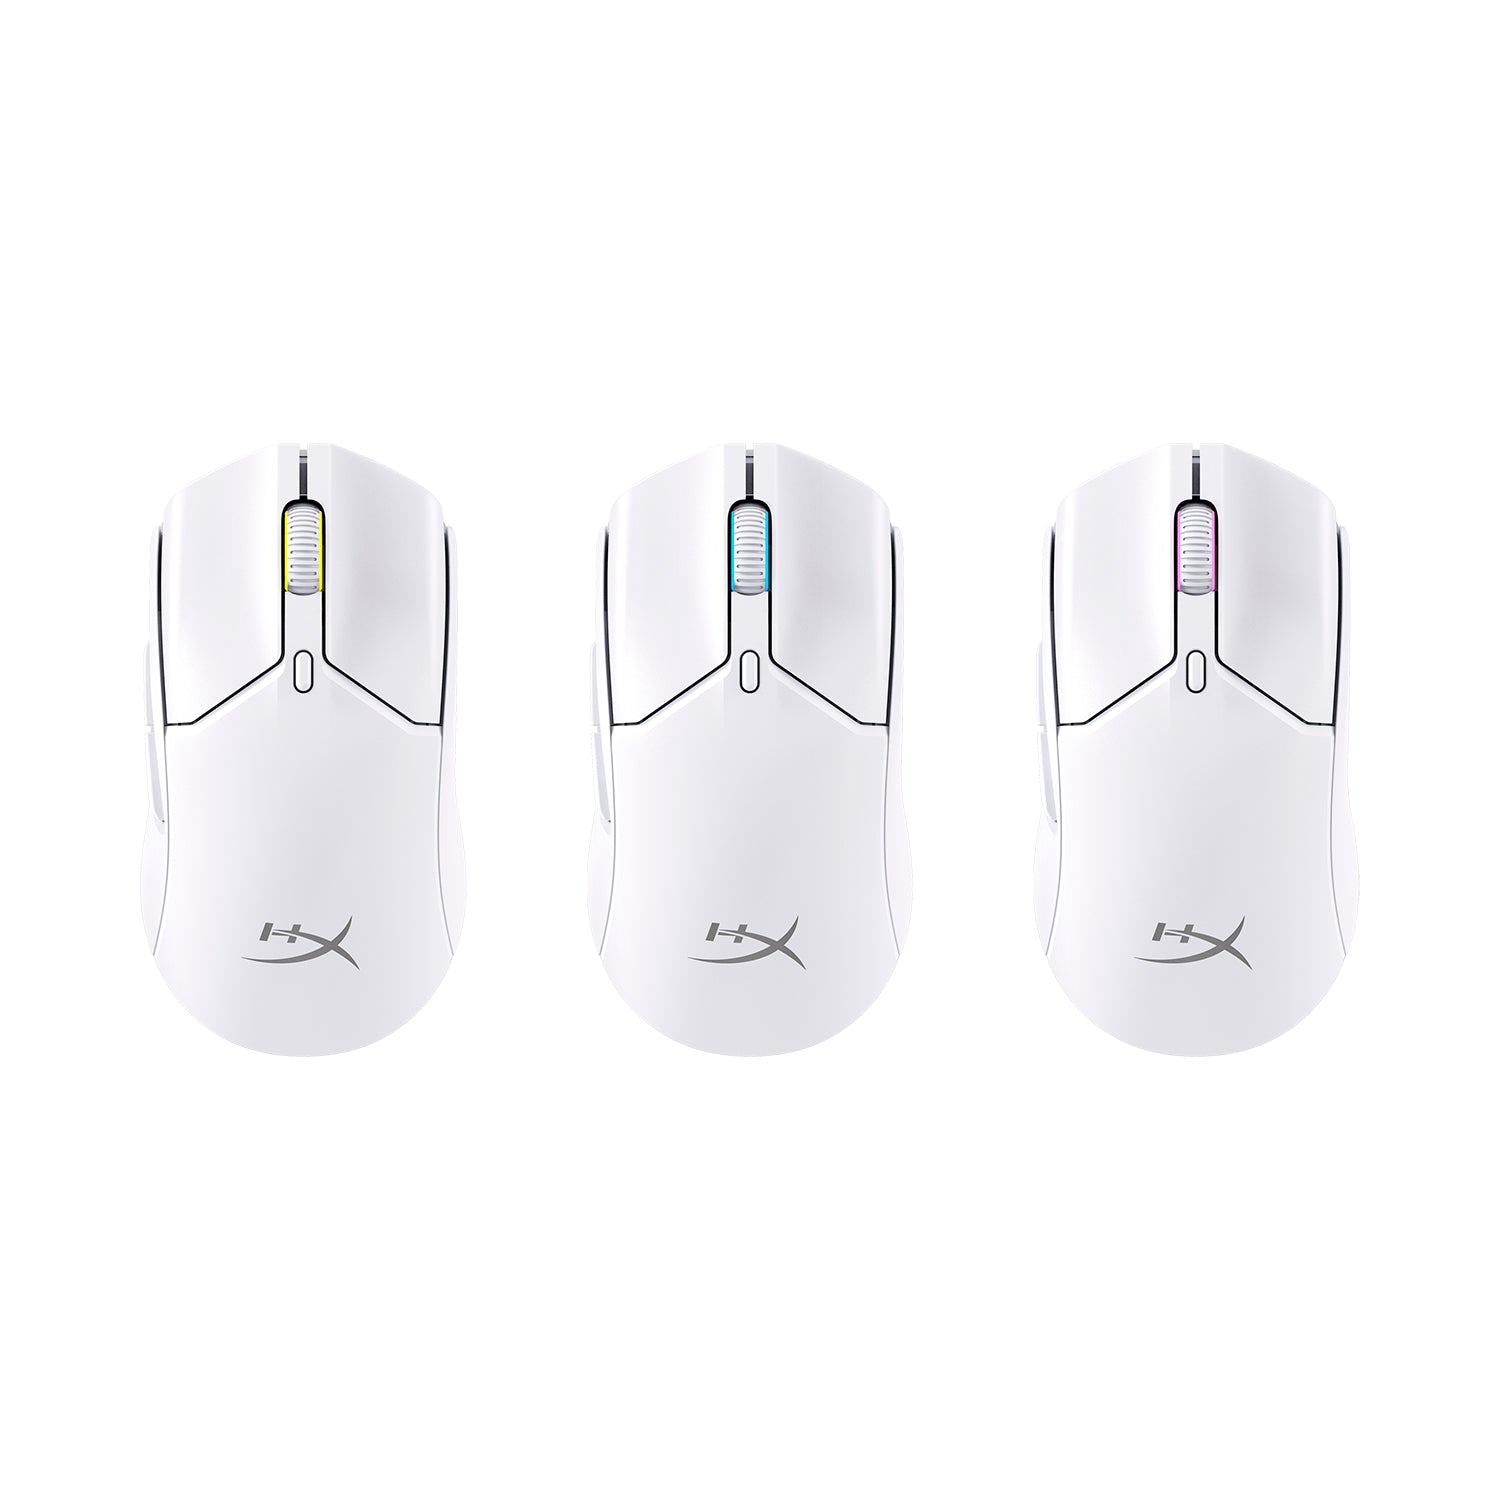 HyperX Pulsefire Haste 2 Mini Wireless White Gaming Mouse - view from above displaying RGB effects